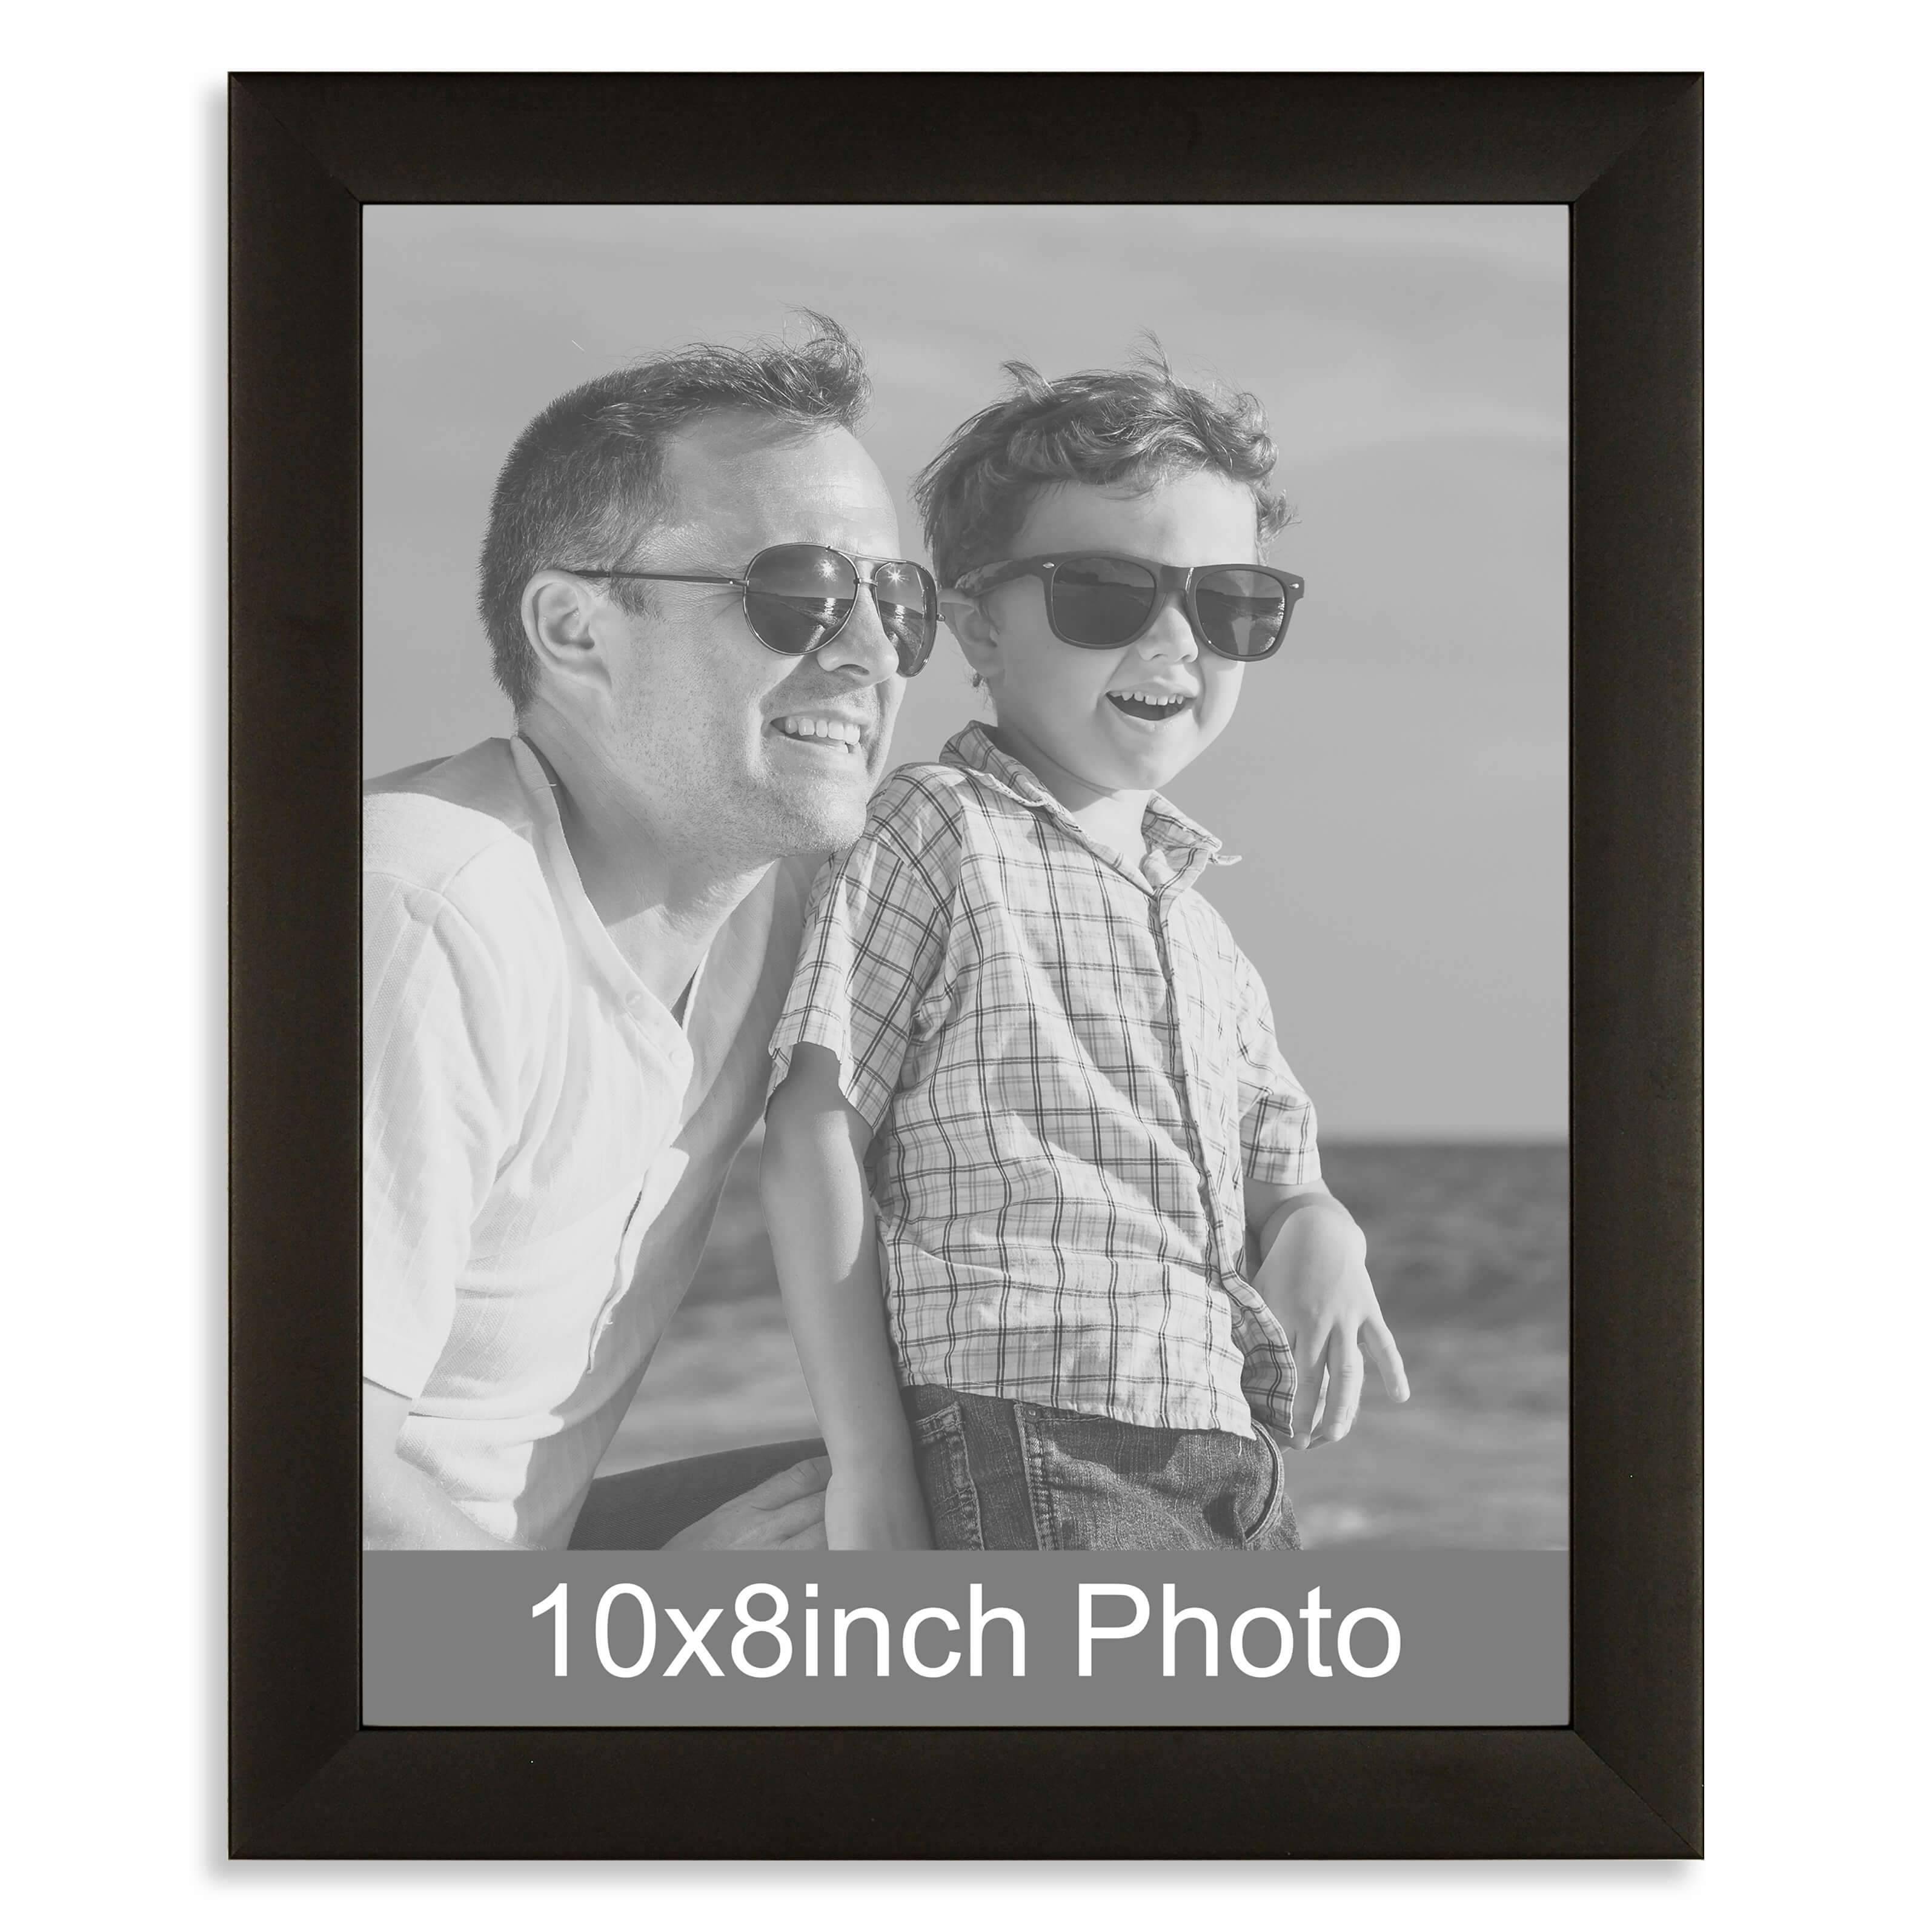 10 x 8inch Black Wooden Photo Frame for a 10×8/8x10in image – Photo uploaded below (select Choose File)